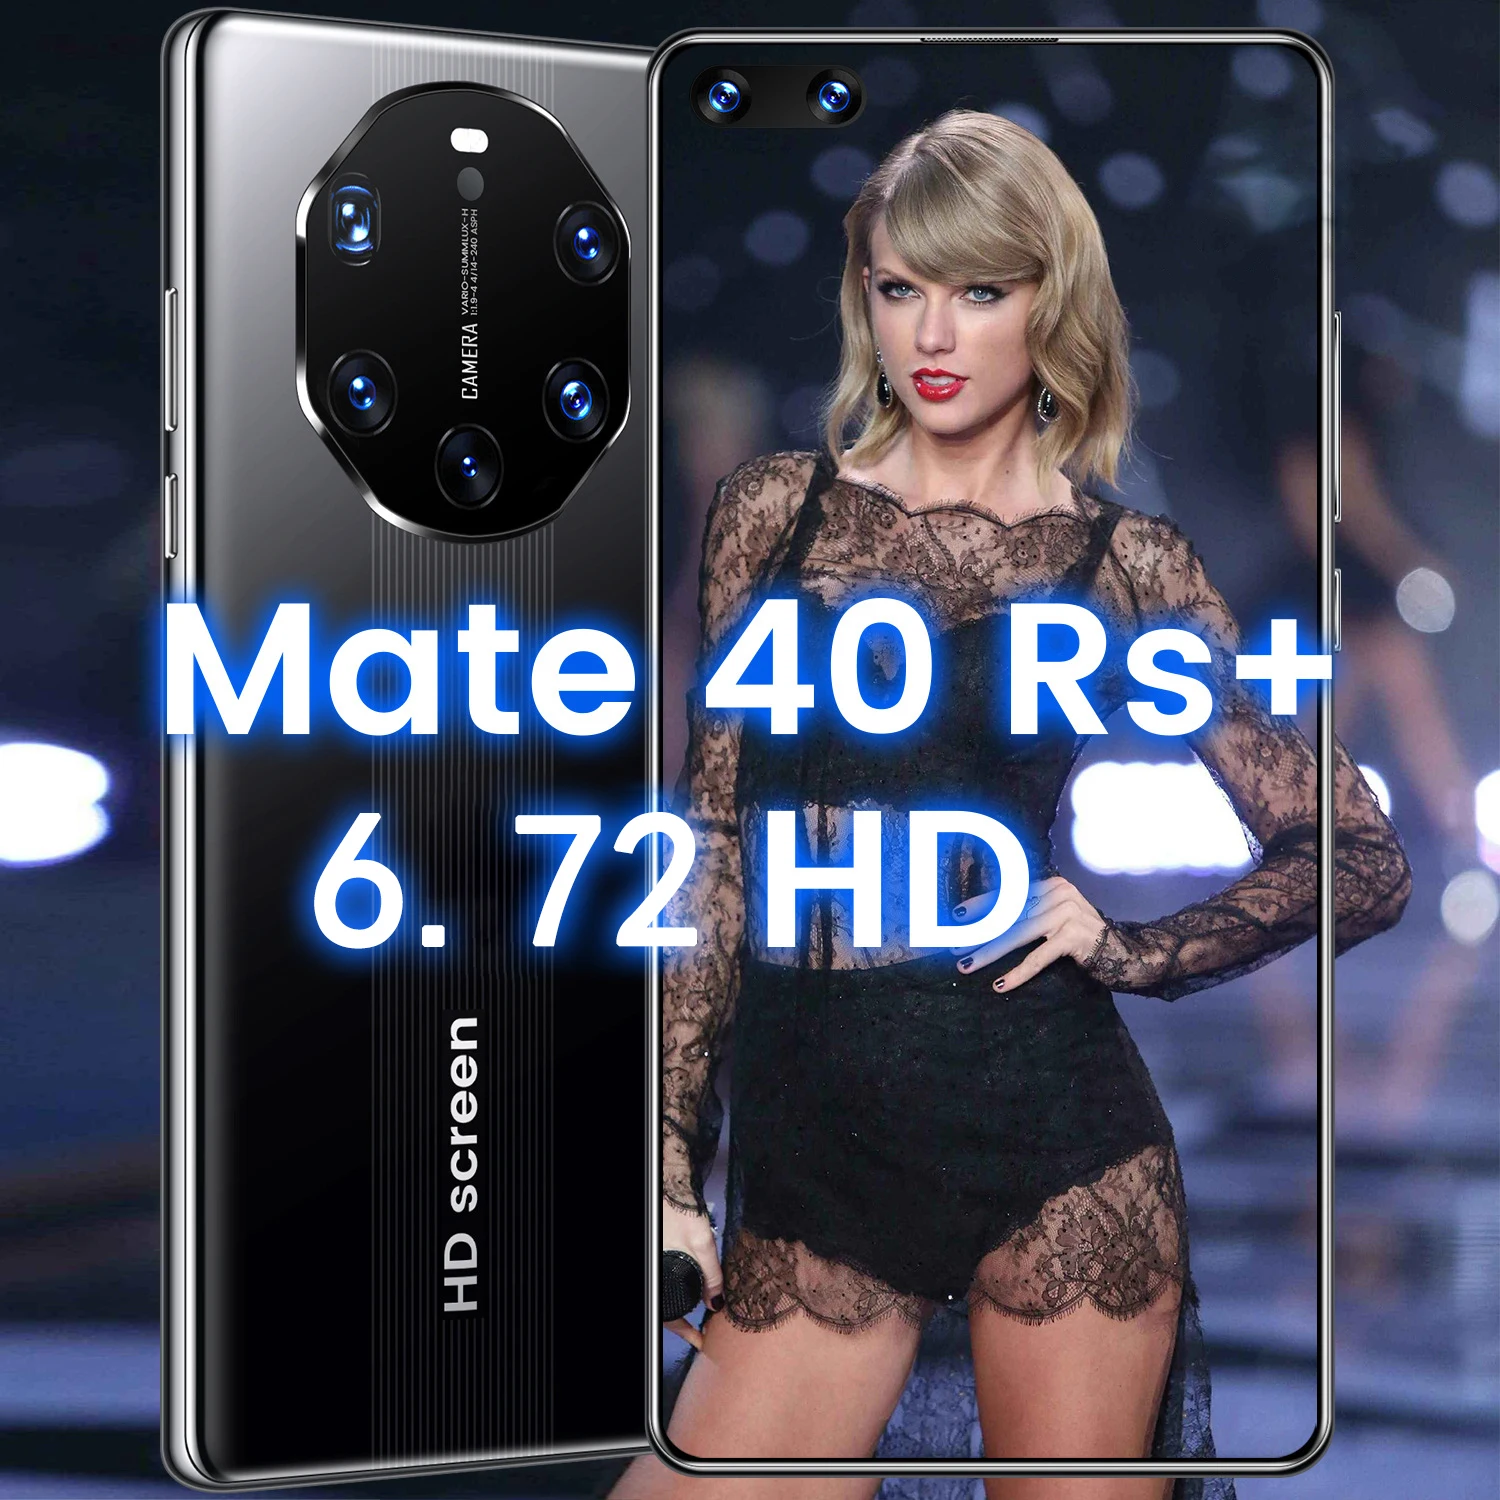 6.72-Inch Mate 40 RS + HD Full-Fit Curved Screen Dual Card Dual Standby Support Face Recognition And Other 8+ 128G